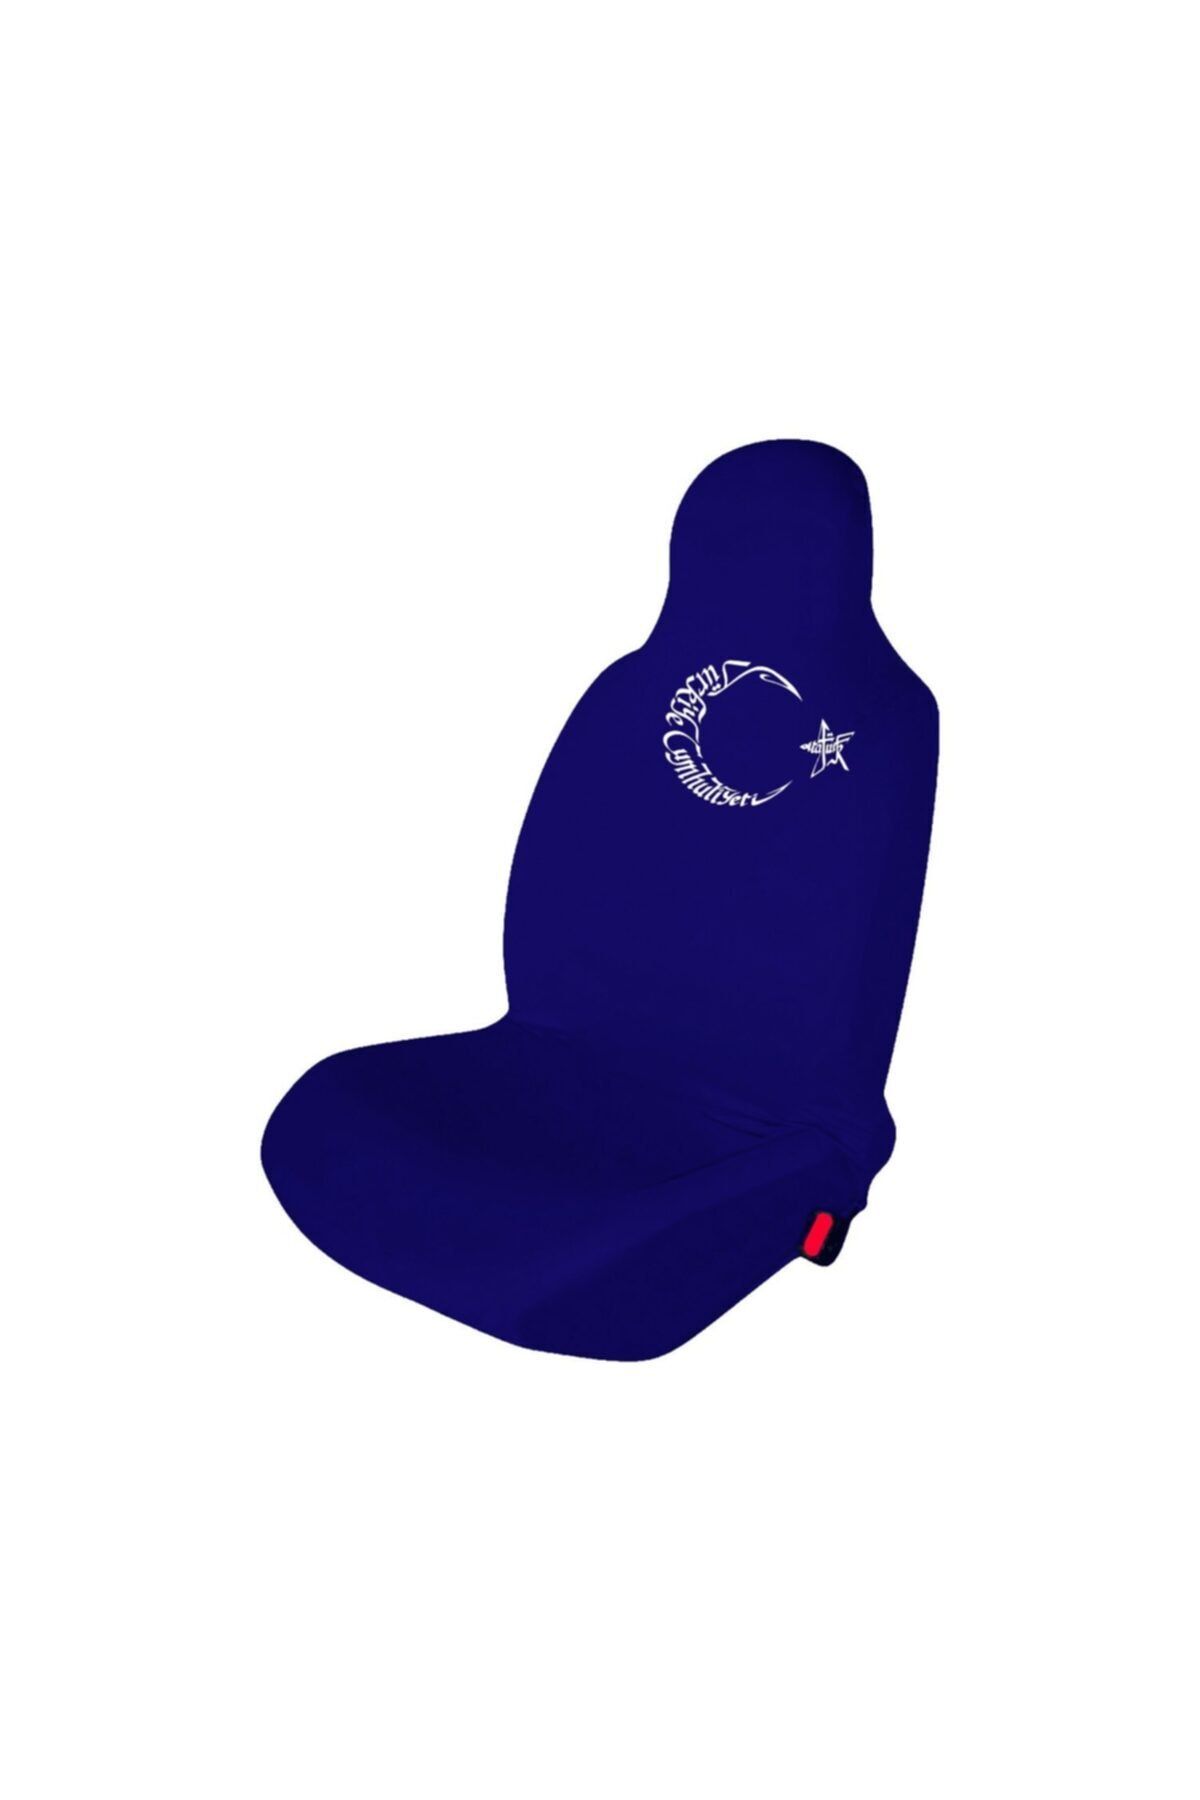 Özdemir Teks Opel Omega Car Seat Cover Crescent and Star Printed Combed  Cotton Service Cover Navy Blue - Trendyol